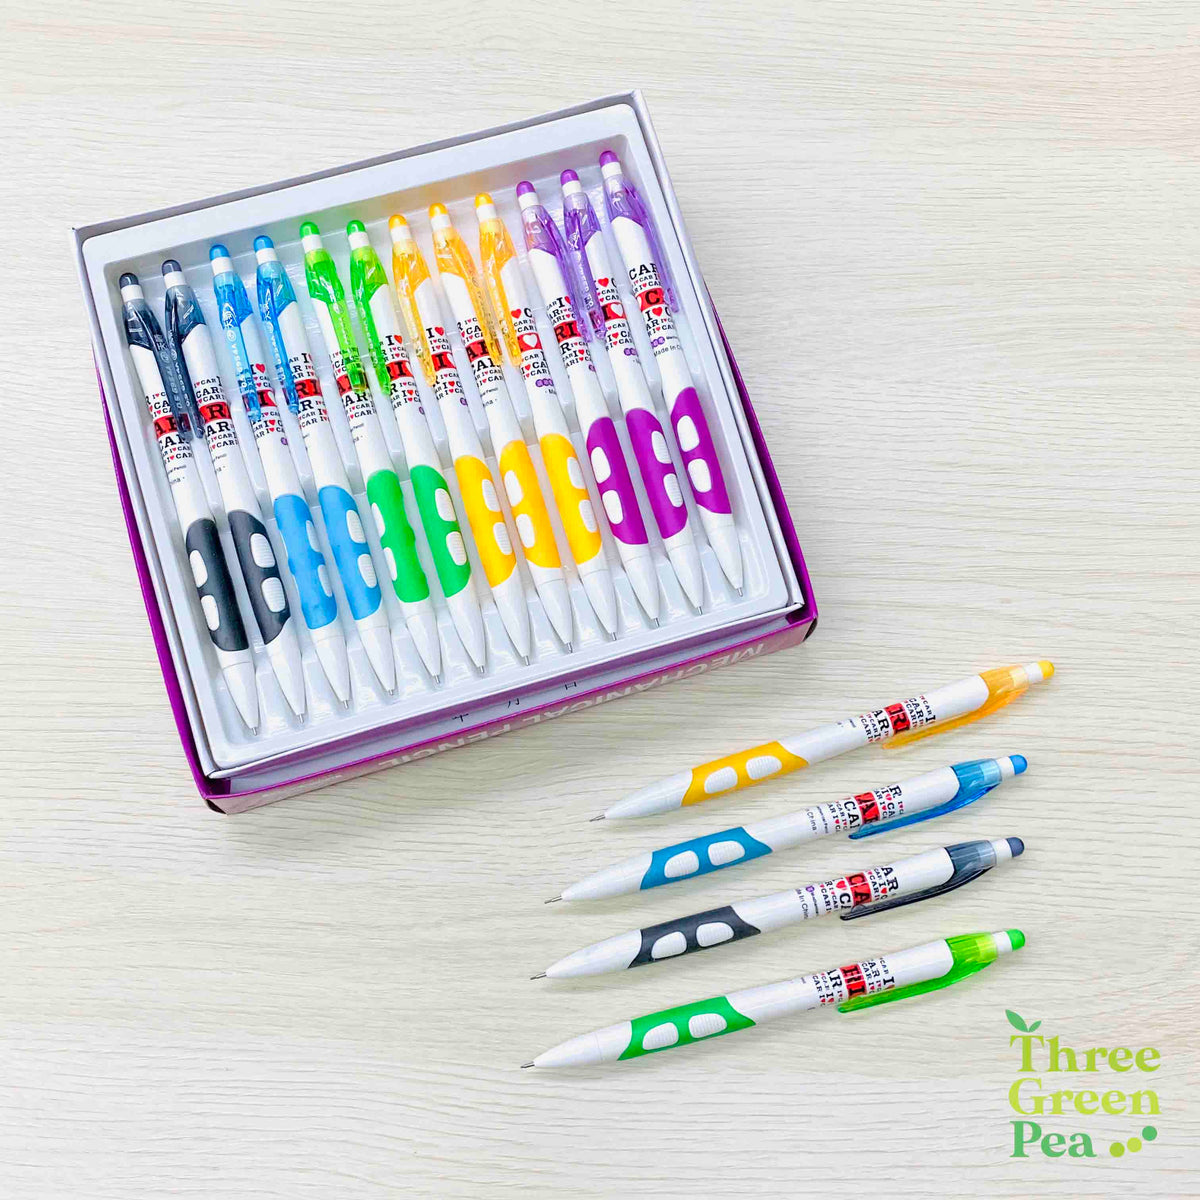 Children's Day Gift Stationery Ideas [0.5mm Mechanical Pencils (24 pieces) per box]